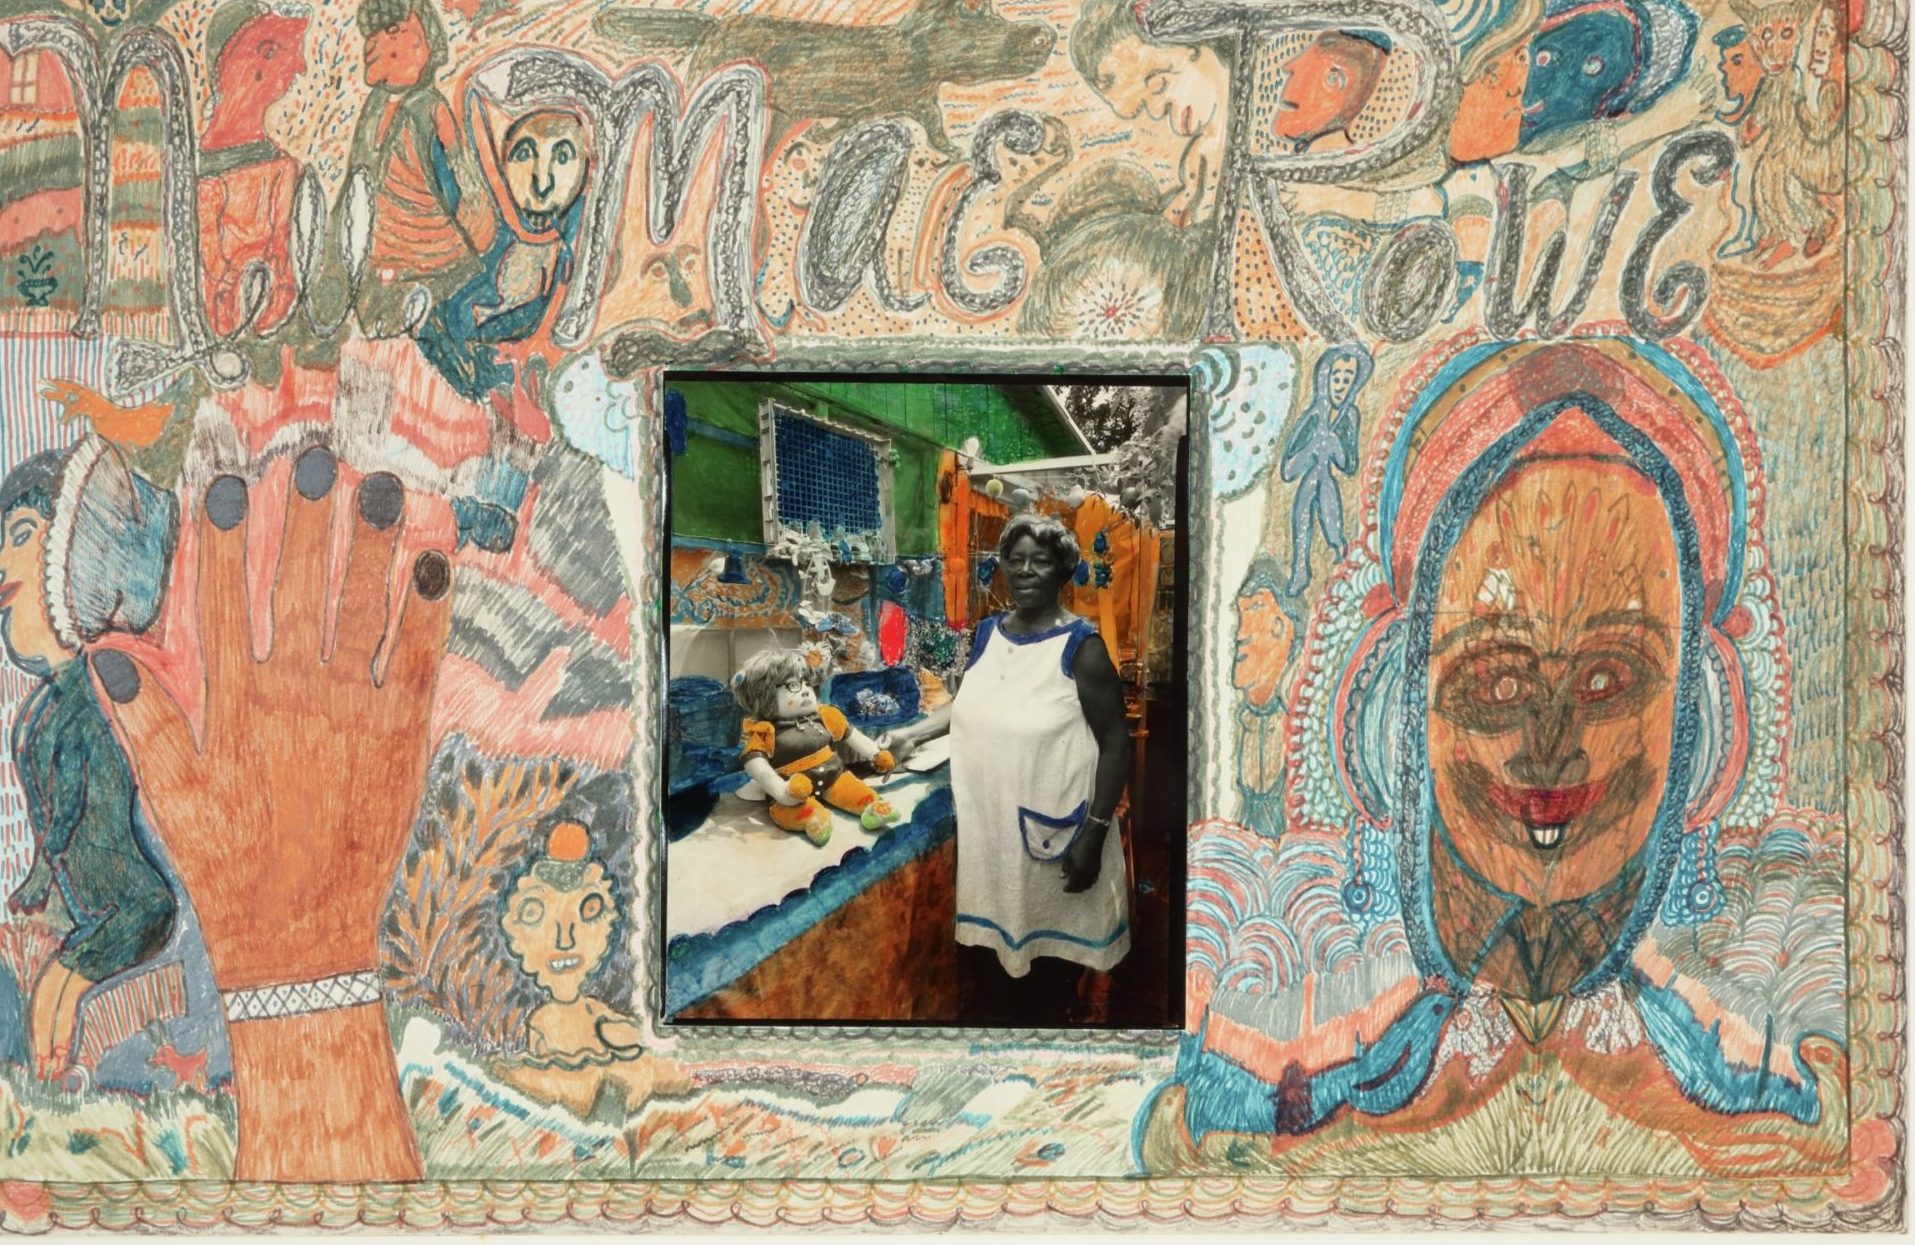 There is a photograph at the centre of a larger drawing. The drawing is in neutral colors with some hints of turquoise and peach. The photo is of a woman wearing a white dress in a crowded room. To her left, there is a stuffed monkey on a countertop. The drawing's composition is very full, and looks collage-like with its inclusion of different, overlapping scenes. At the left of the photo is a large hand with black nails and a white bracelet. AT the right of the photo is an anthropomorphic head or mask with ornate blue and pink outlining. The work is signed in large letters at the top of the composition.